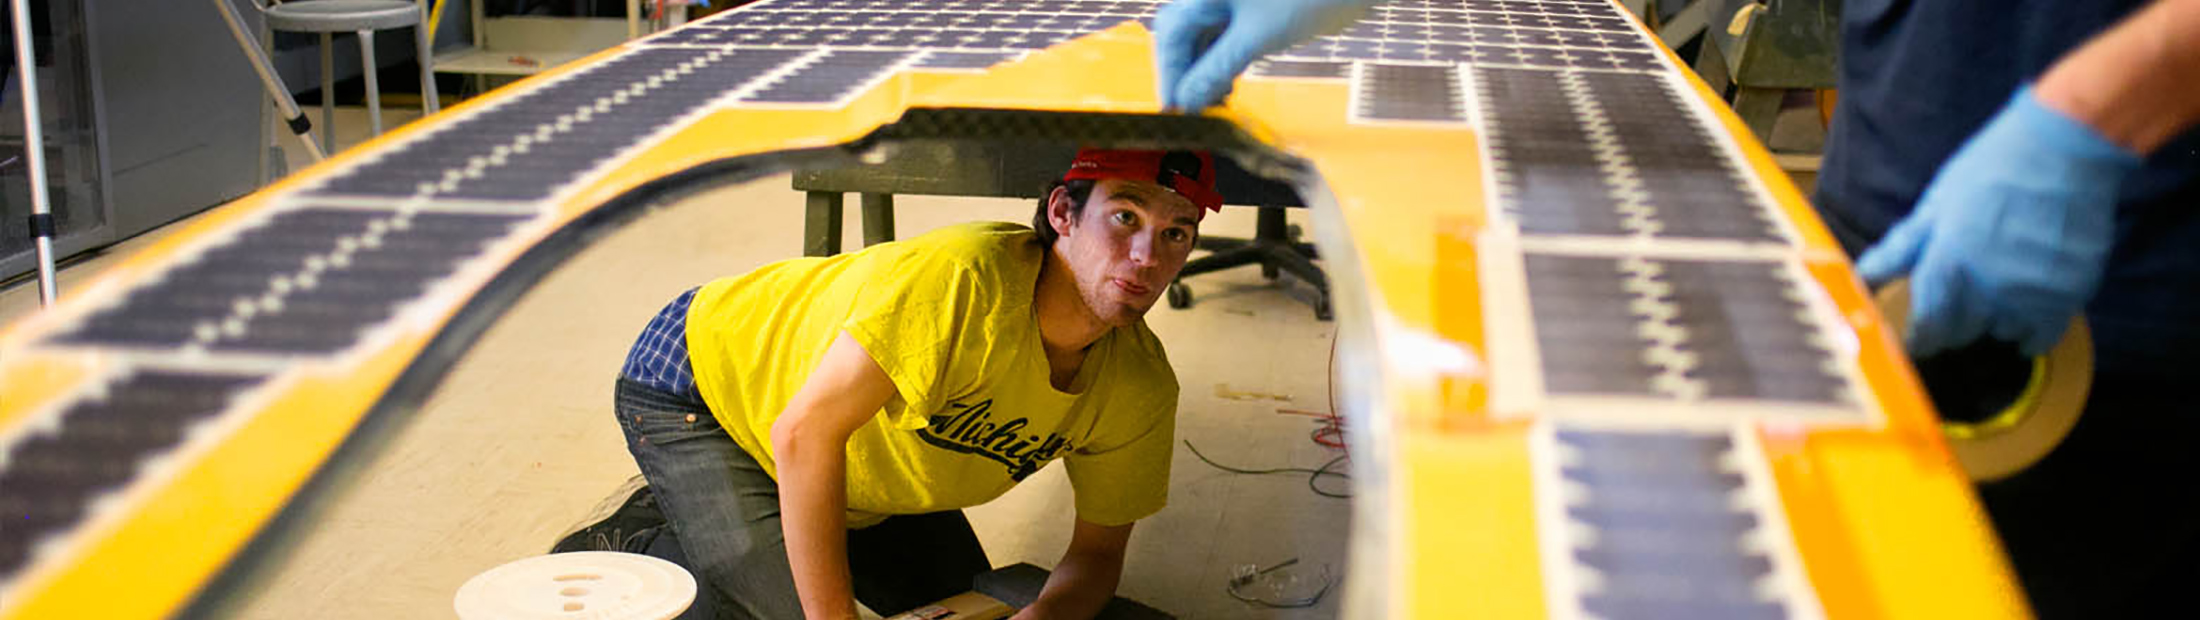 Image of team members carefully installing solar cells on the array canopy